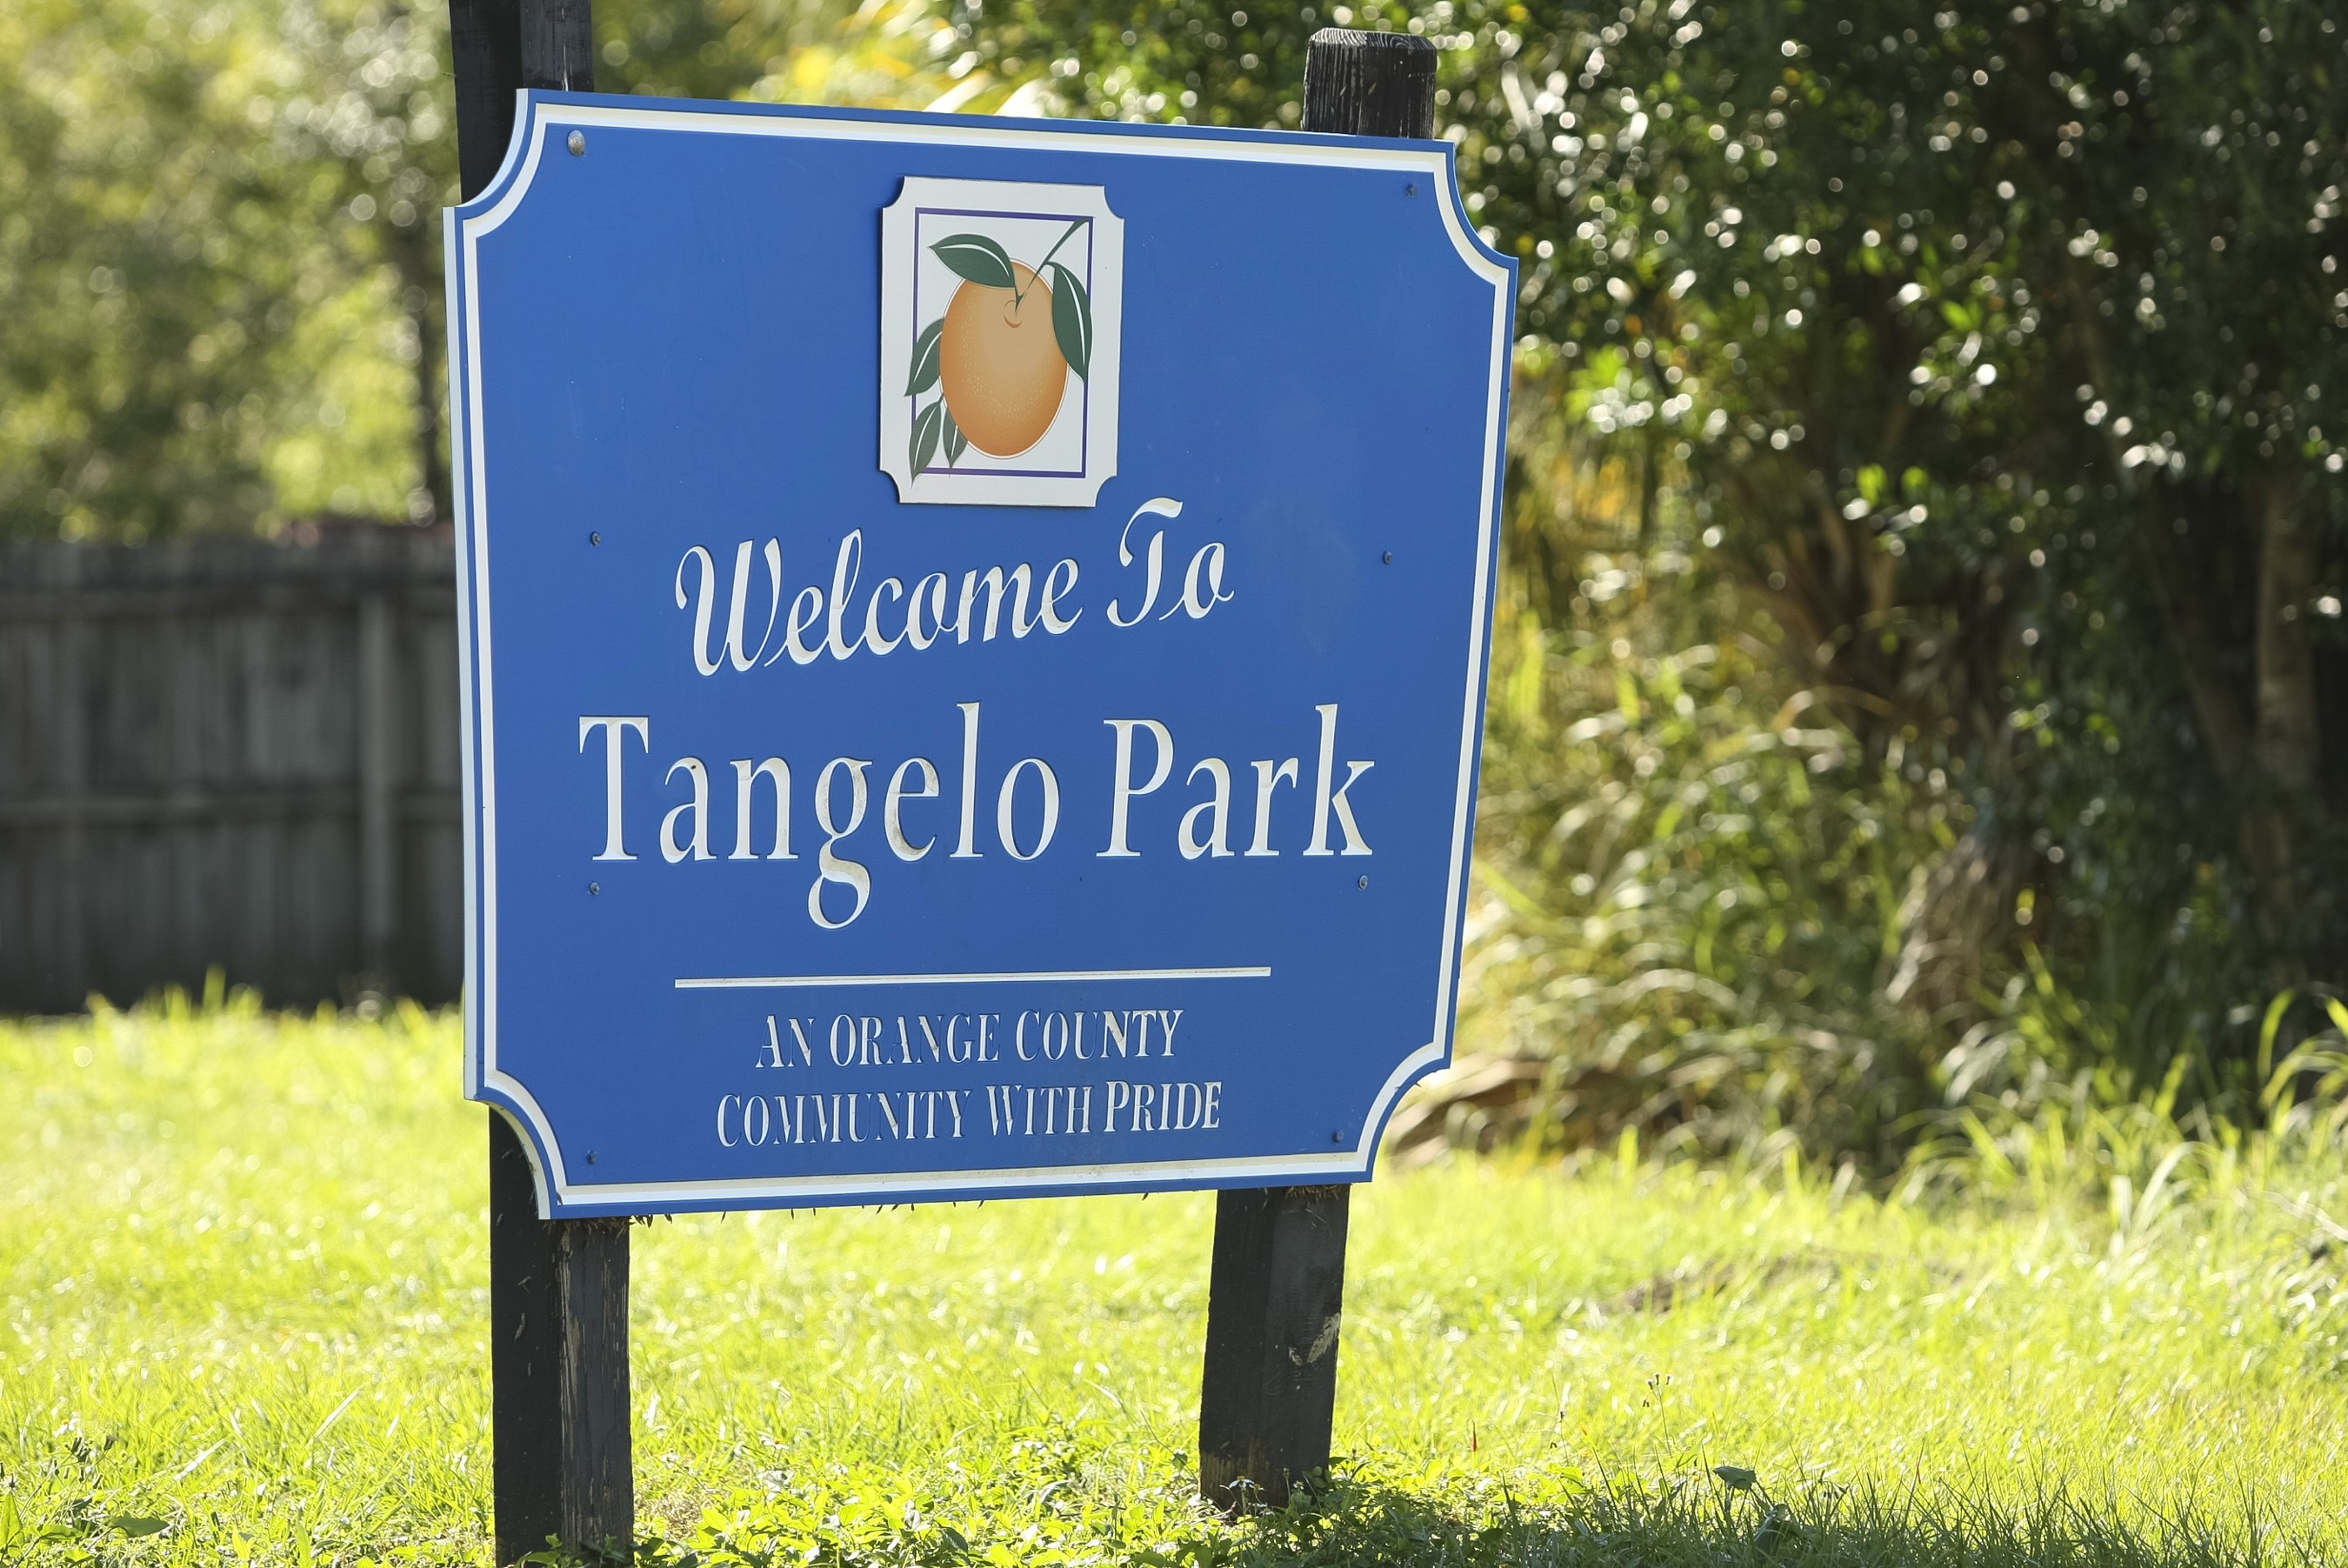 A photo of the "Welcome to Tangelo Park" sign